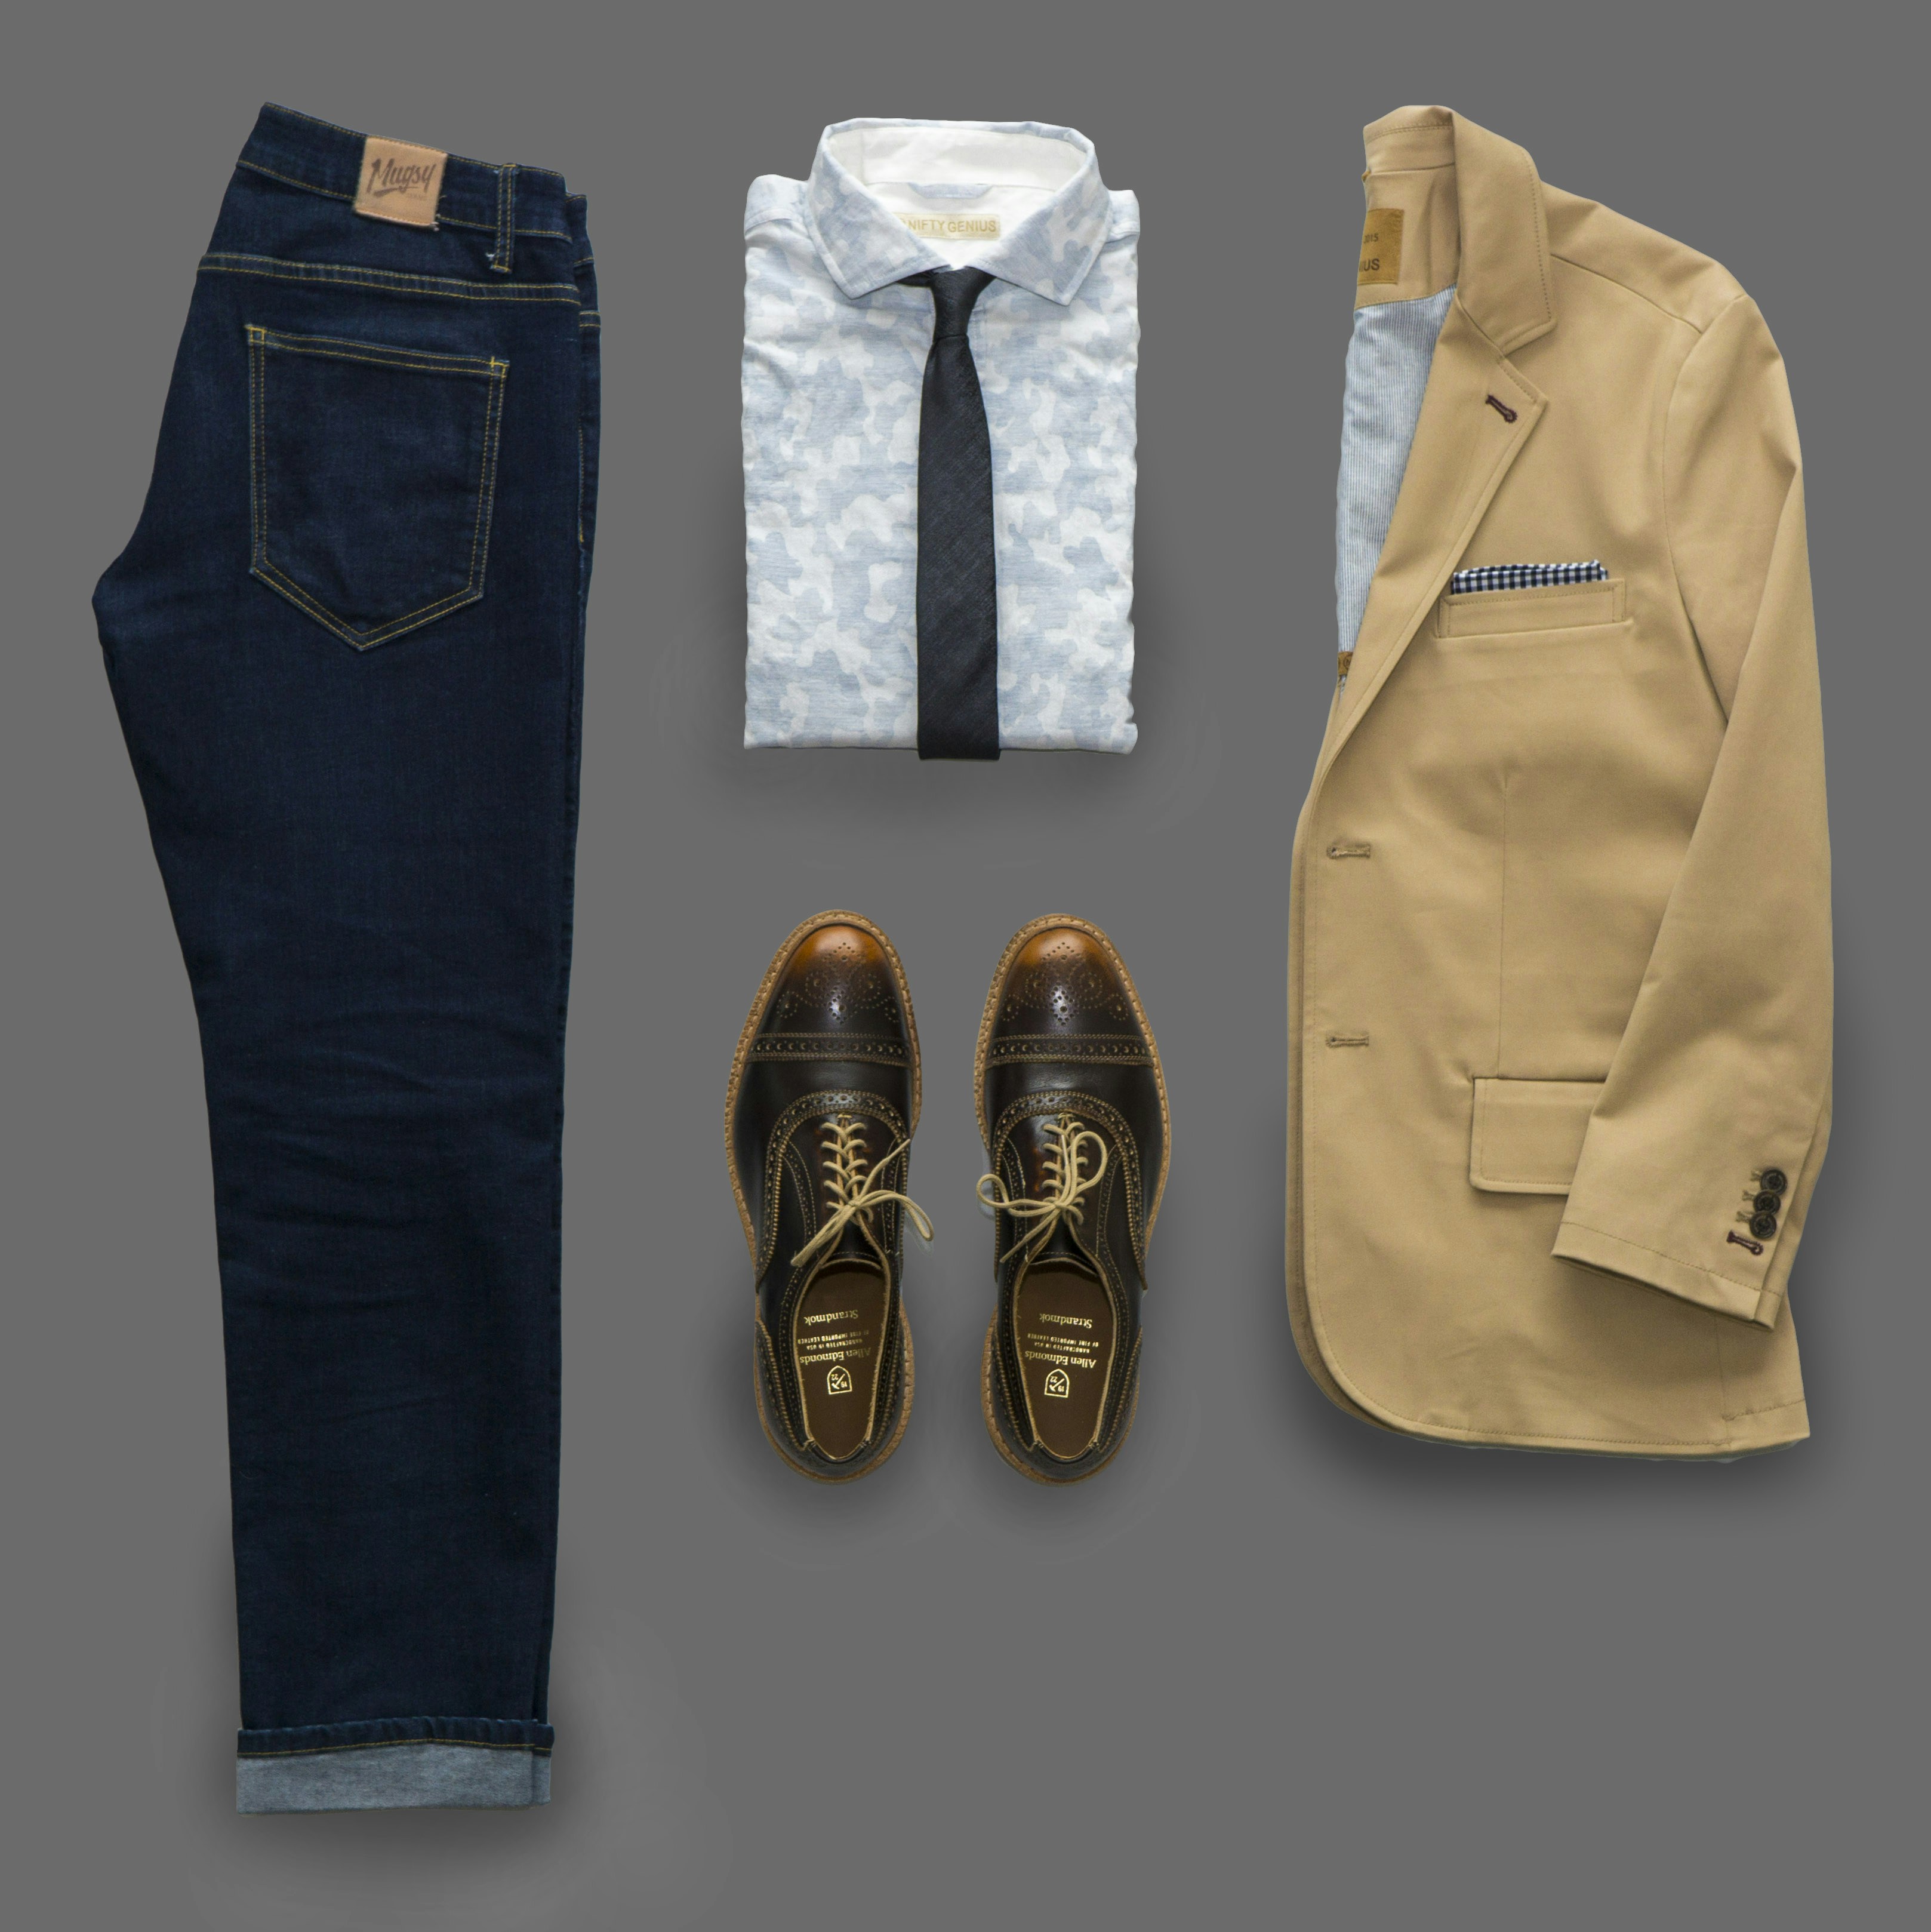 Dapper Professional's bold flatlay combination with a linen camo shirt, tie, khaki blazer and a pair of dark denim. The shoes are a bold pair of strandmoks. Elevate any casual look by adding a tie!